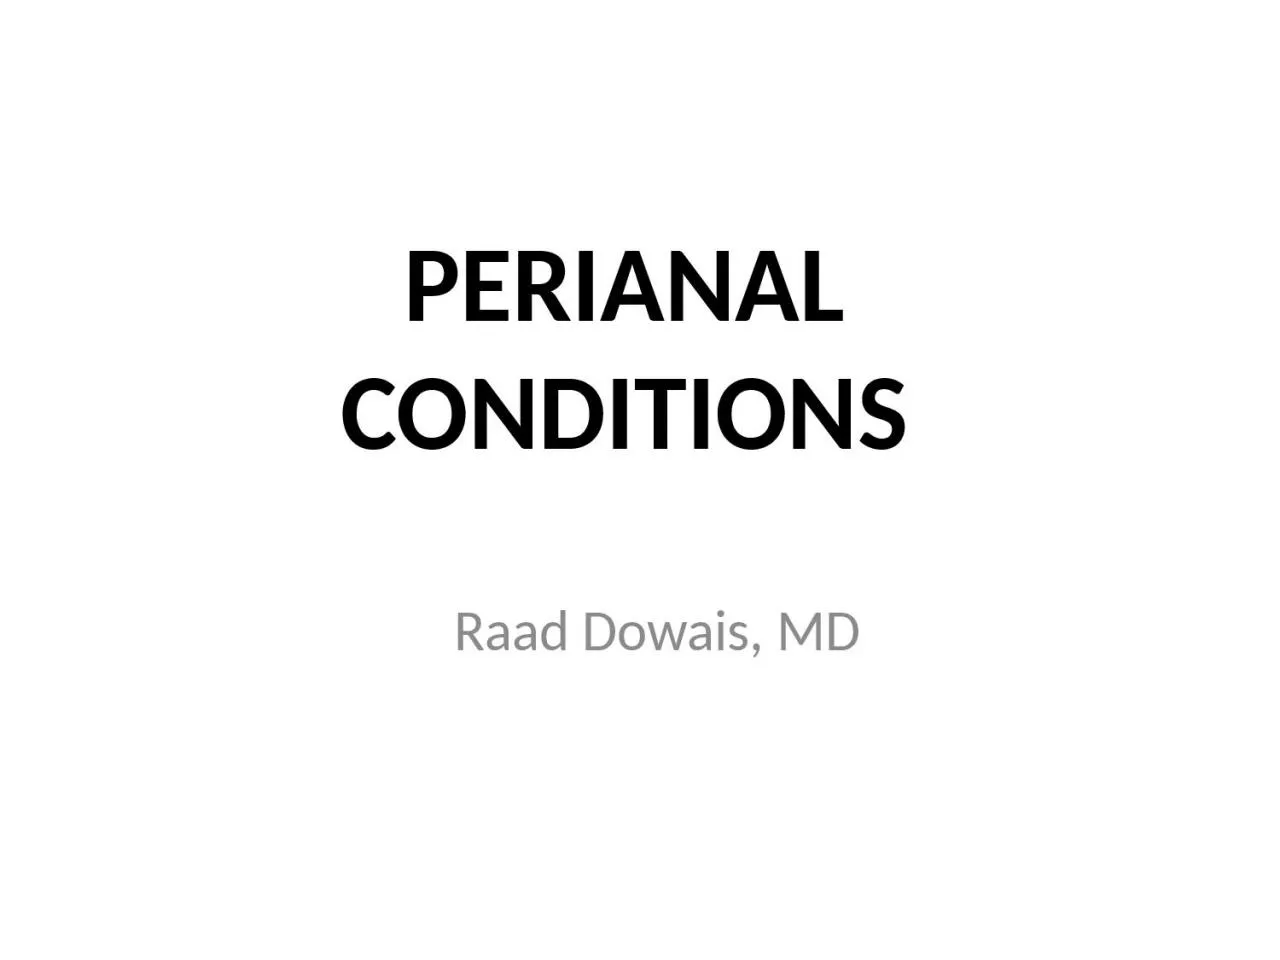 PERIANAL CONDITIONS Raad Dowais, MD